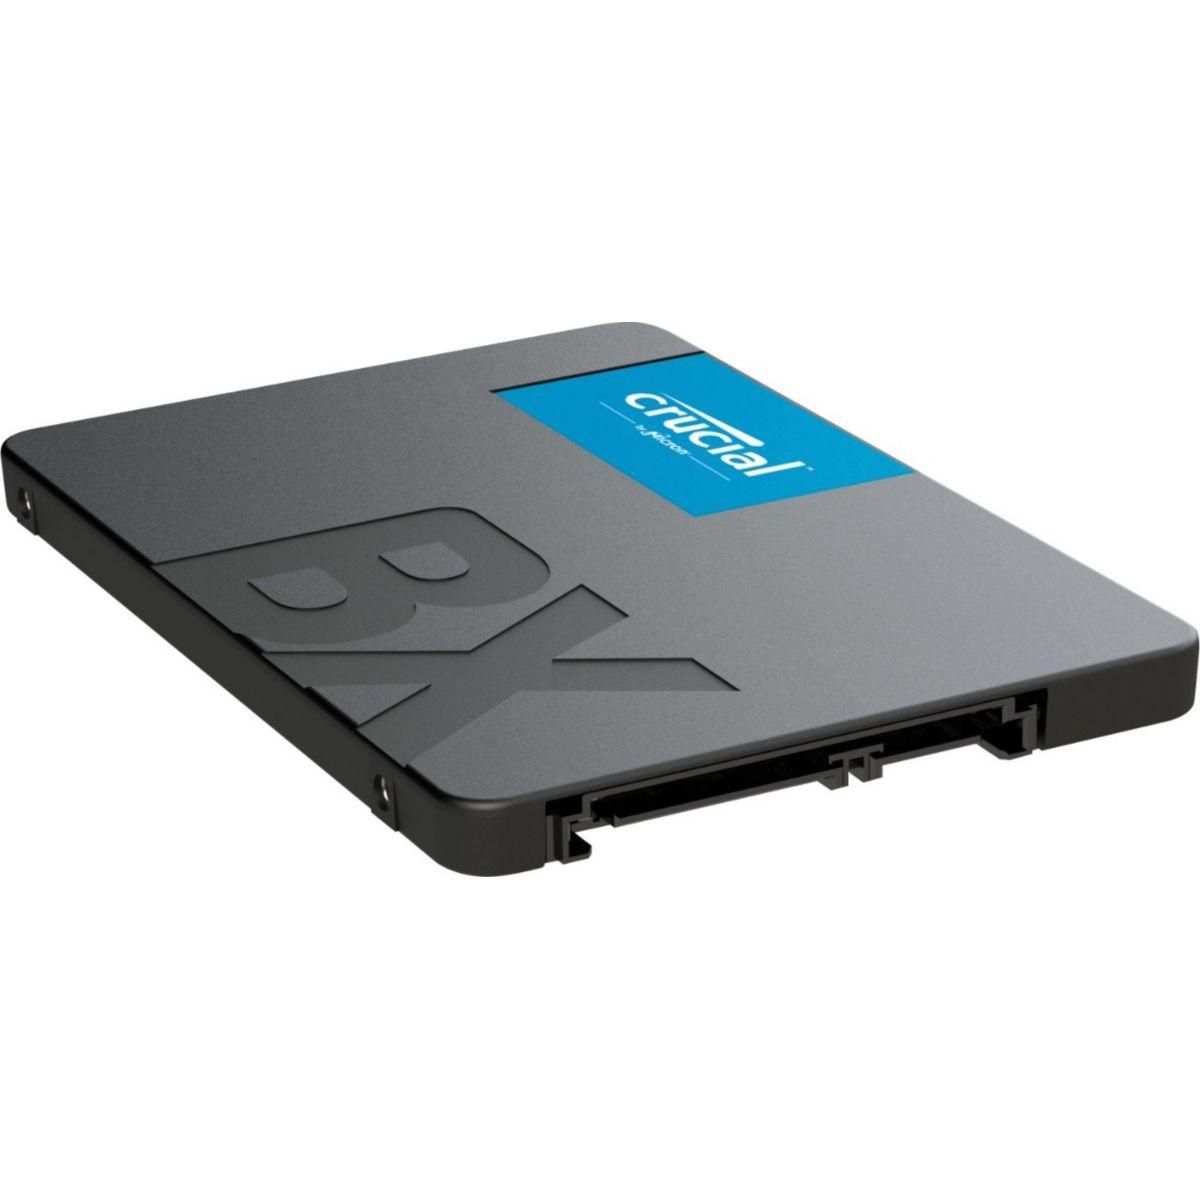 Crucial Disque dur SSD interne 2To BX500 pas cher 